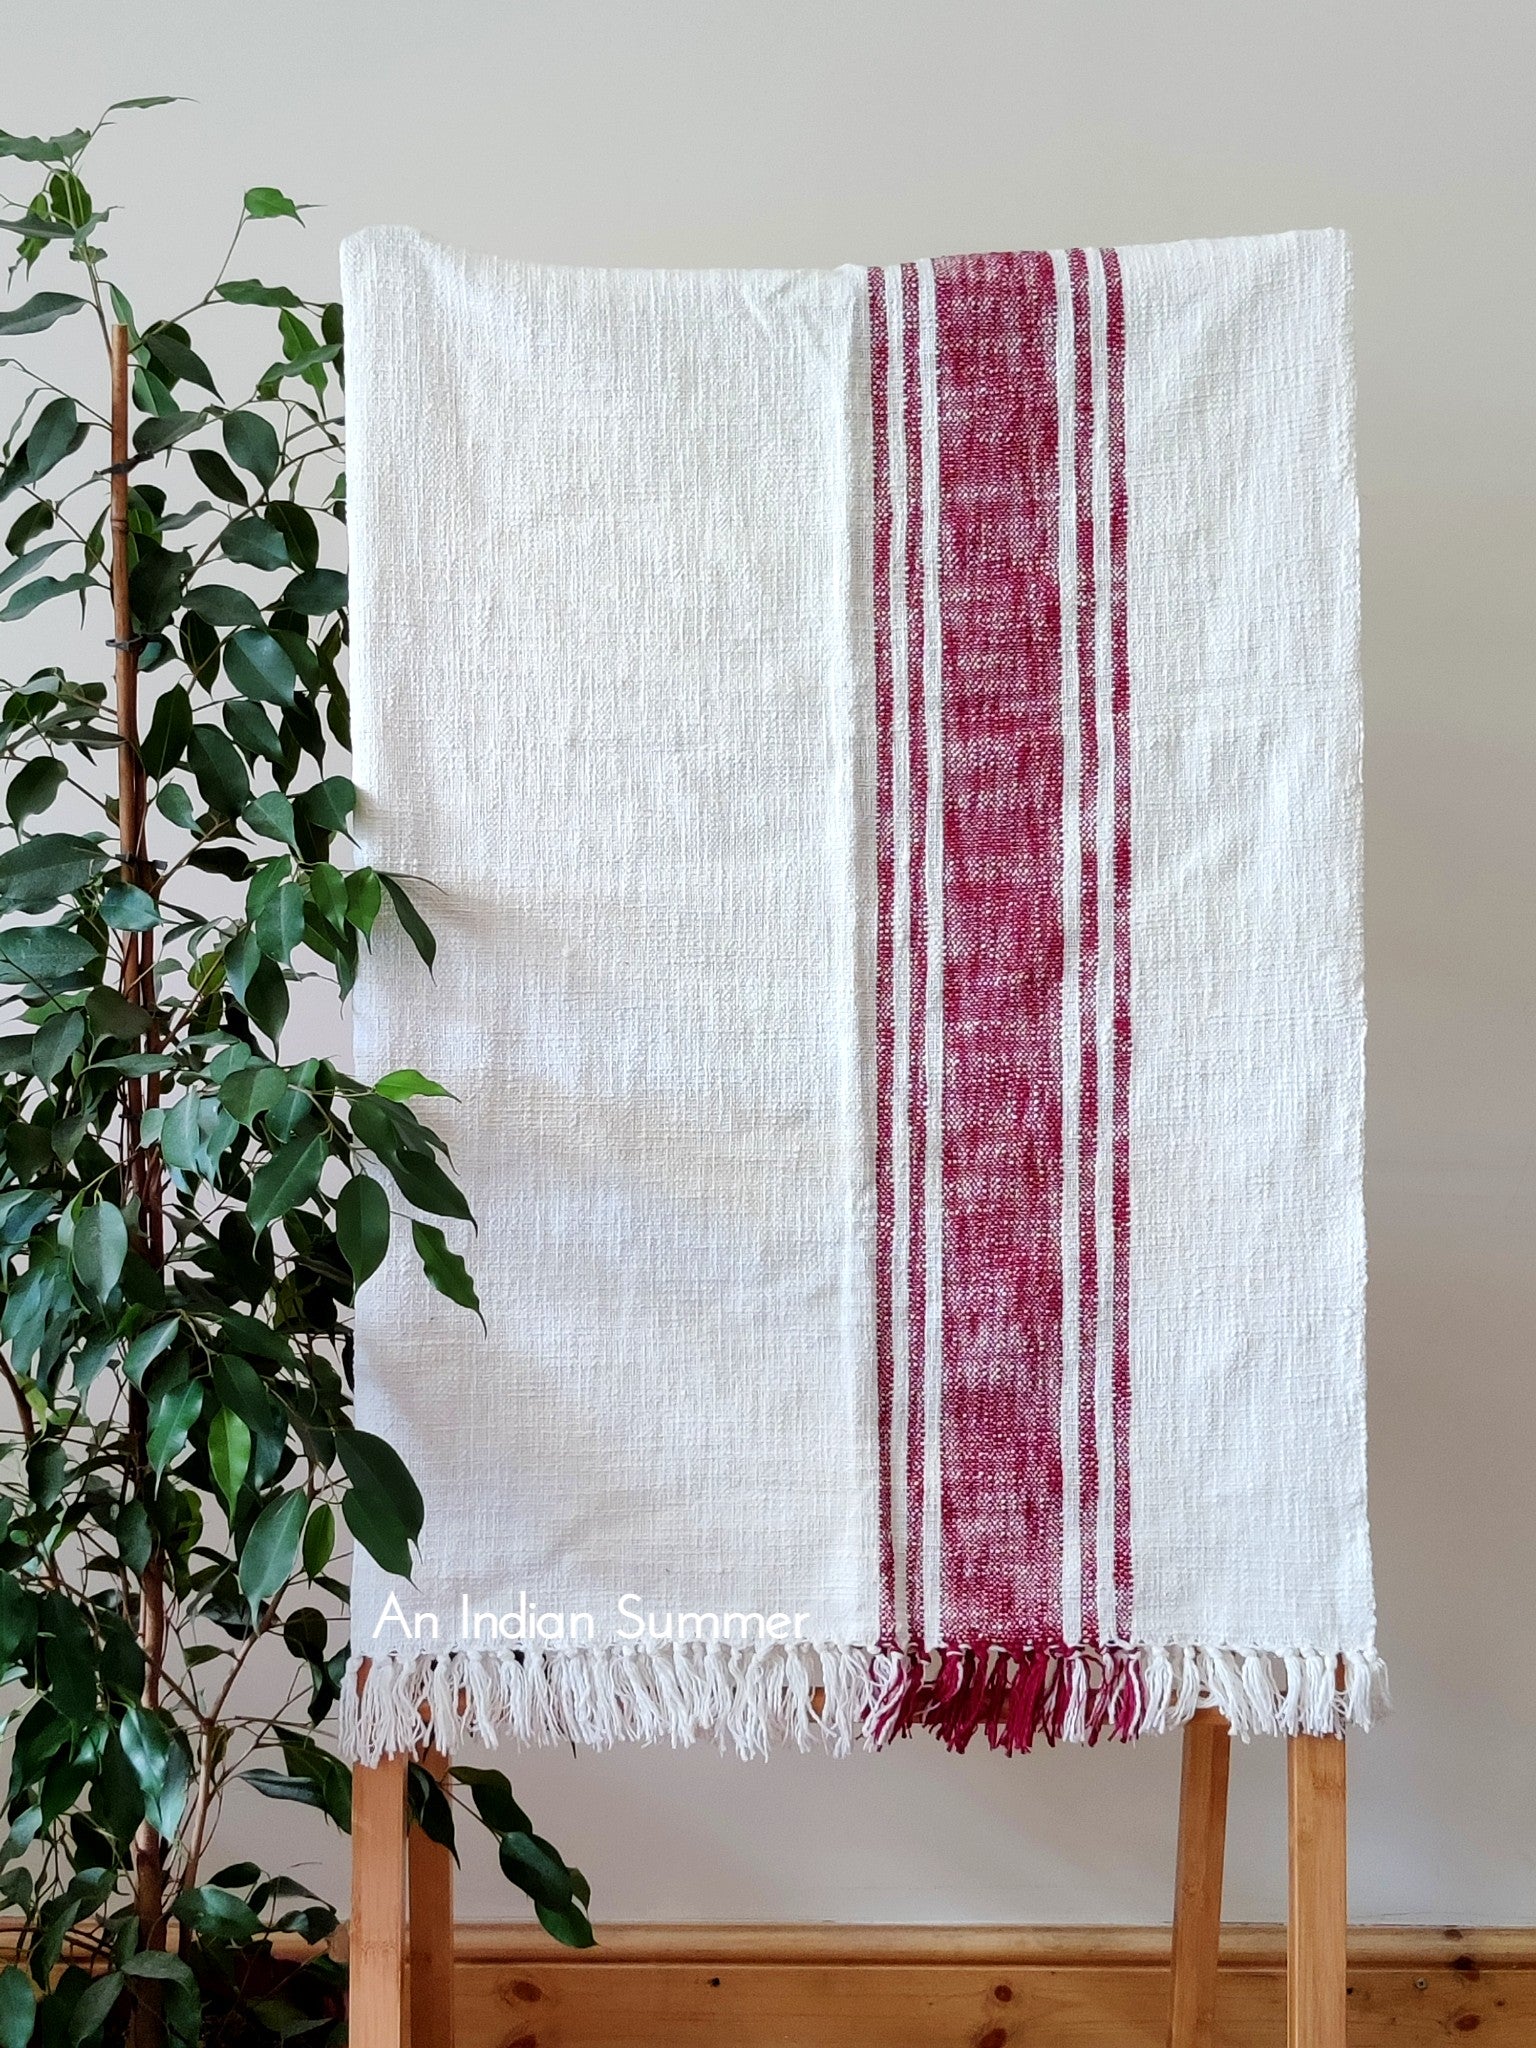 Red | French Stripe | Handwoven Khadi Cotton Throw | An Indian Summer | Seasonless Timeless Sustainable Ethical Authentic Artisan Conscious Clothing Lifestyle Brand